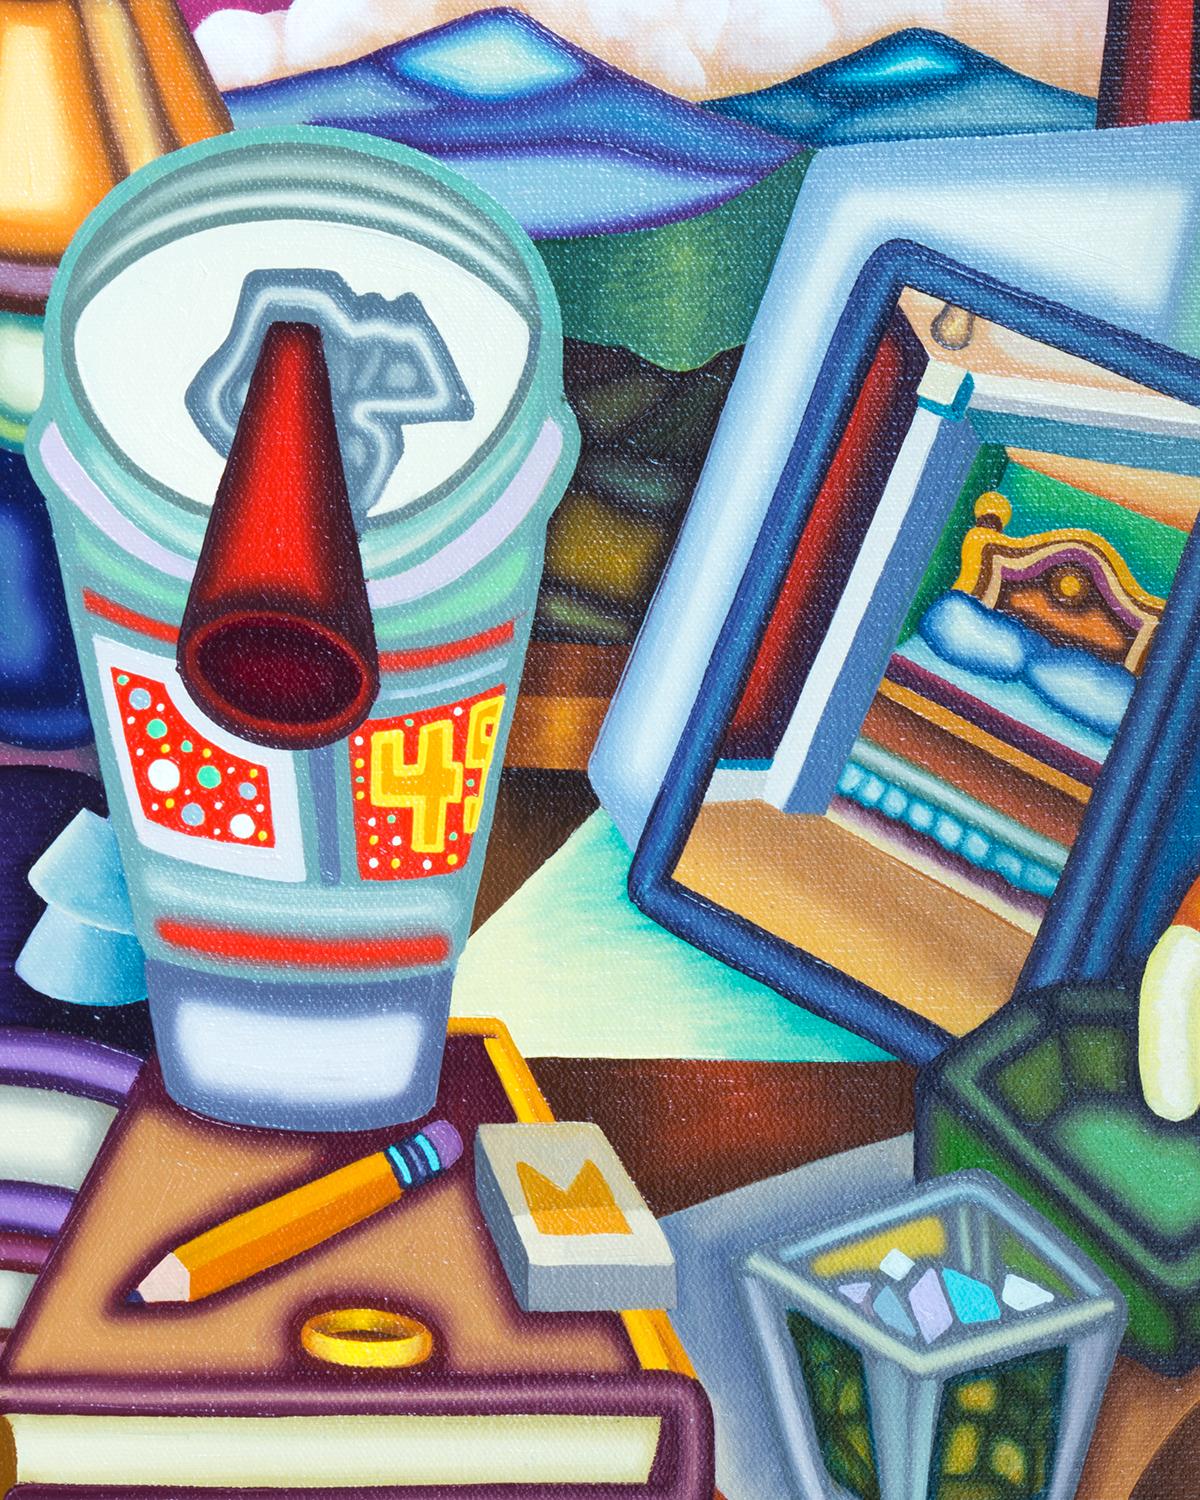 VICE AND REFLECTION - Cubist, Surreal Still Life with Bold Colors - Contemporary Painting by Jason Stout